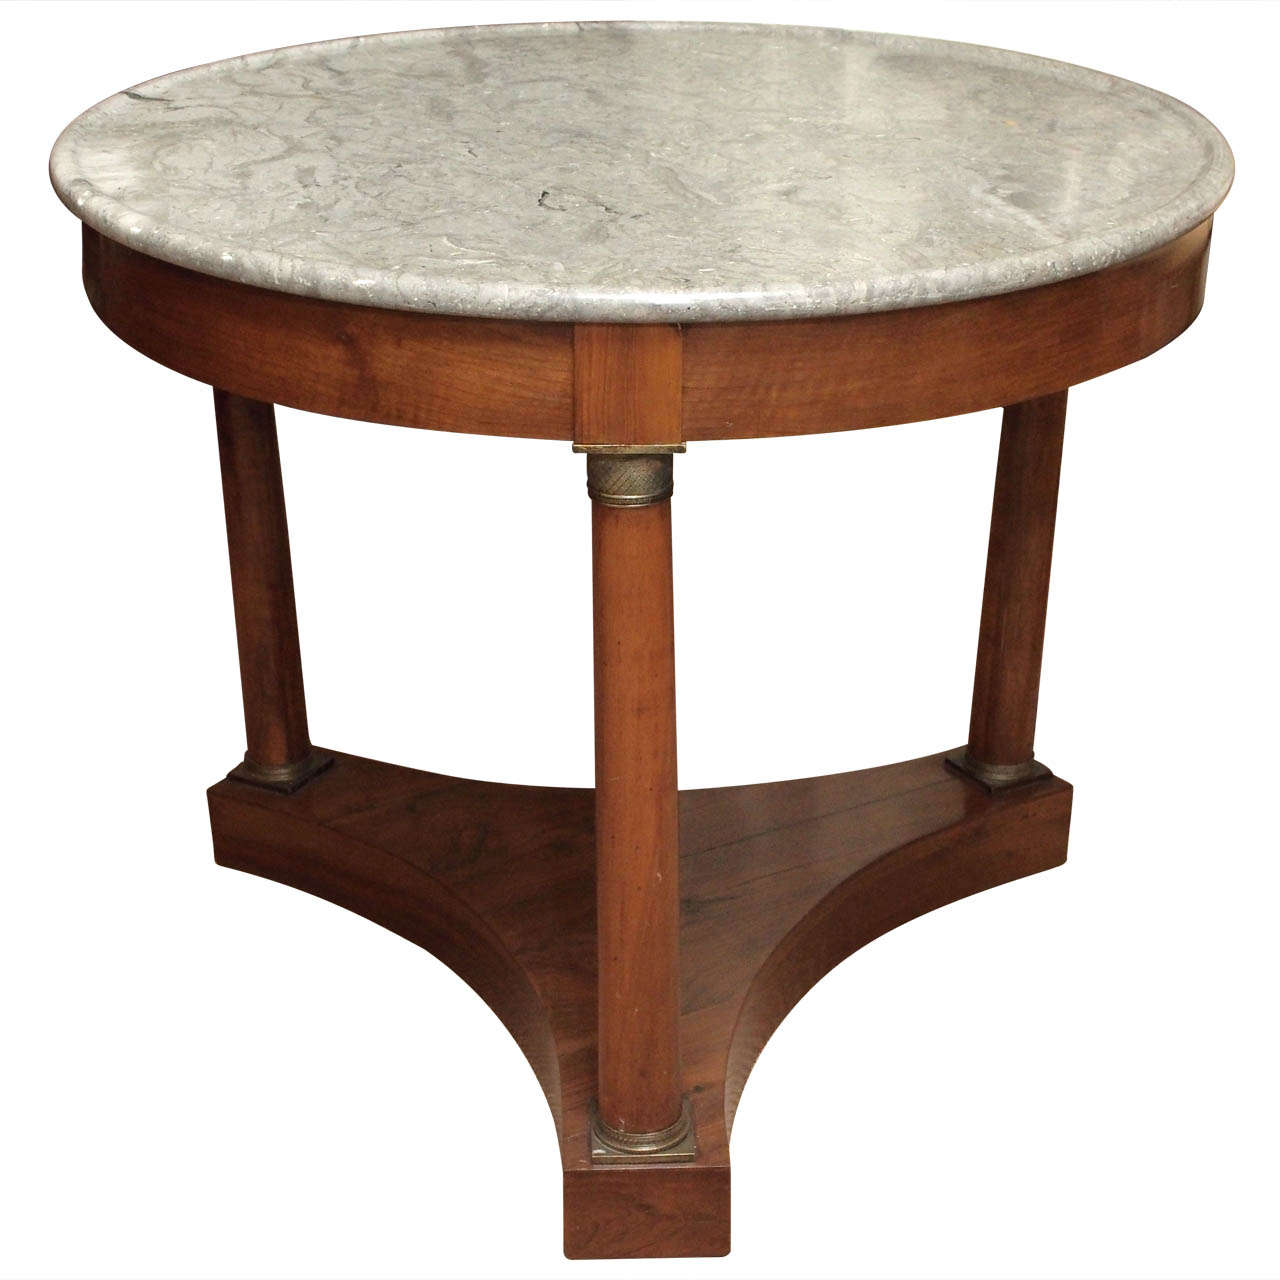 19thc Empire Style Walnut Gueridon marble top, brass accents